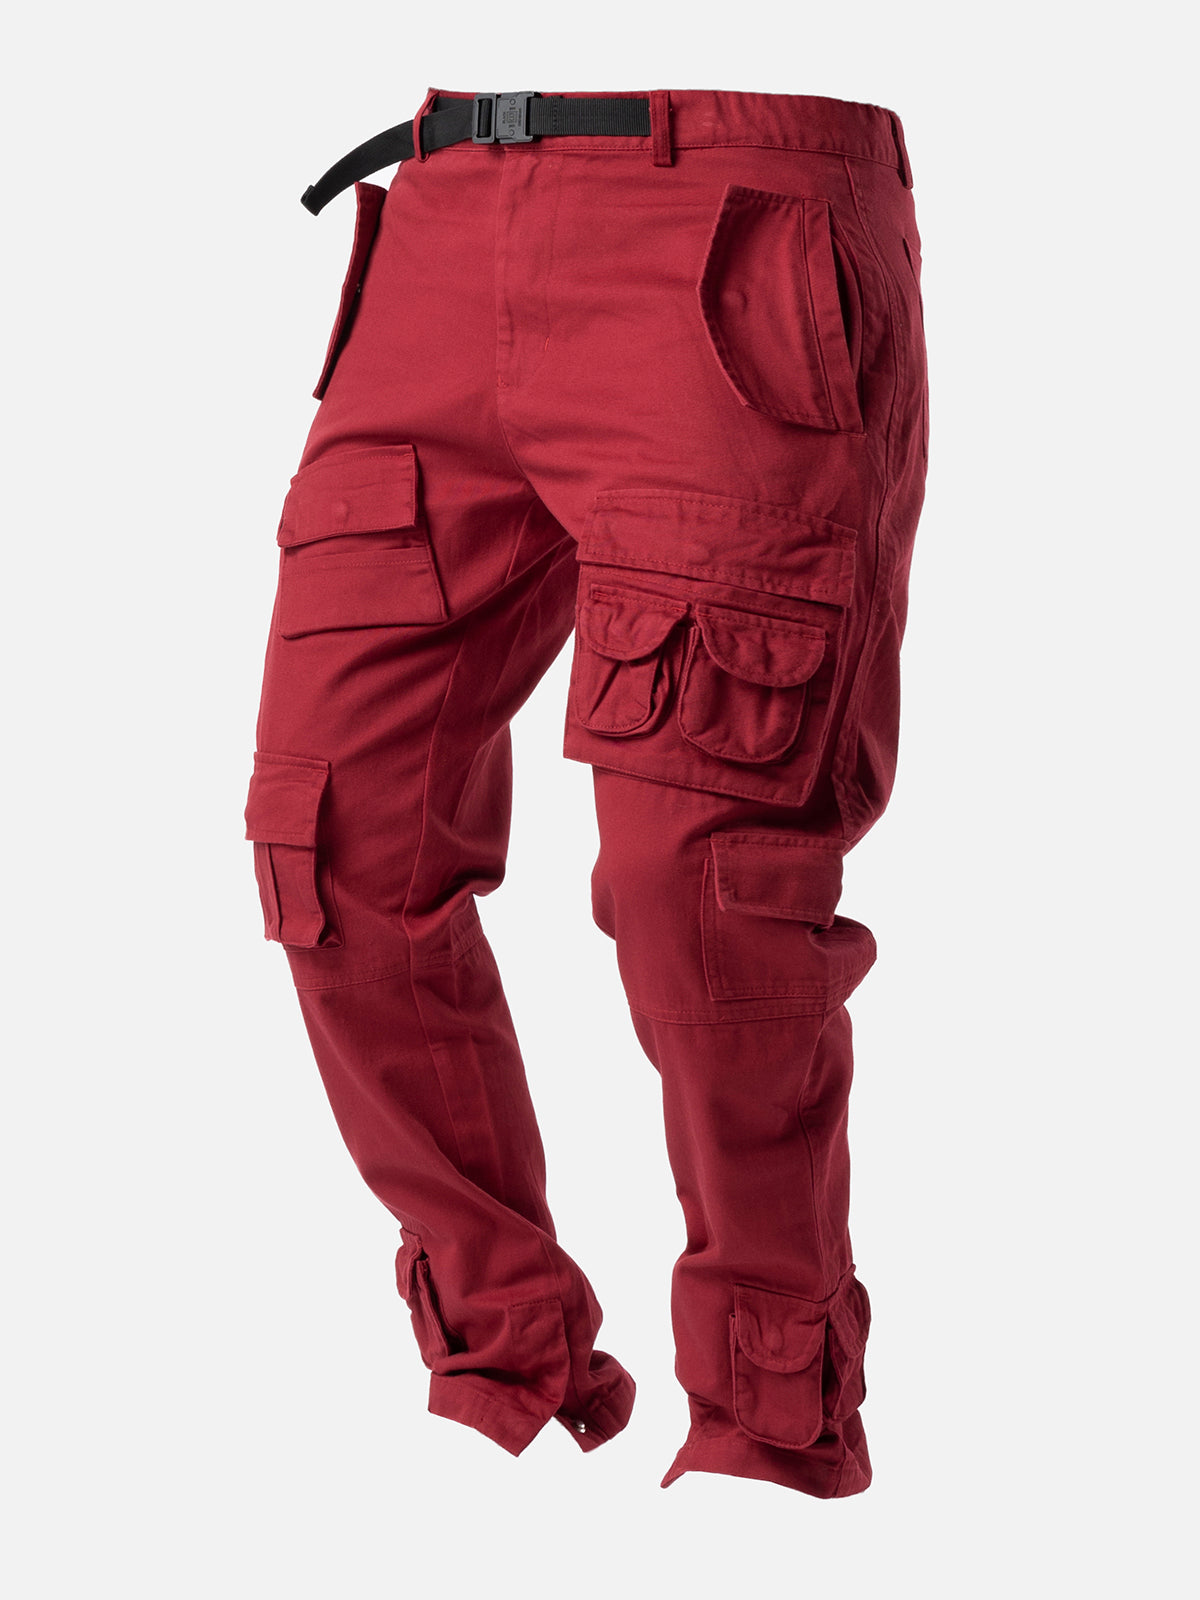 Buy Red Trousers  Pants for Men by Rare Rabbit Online  Ajiocom